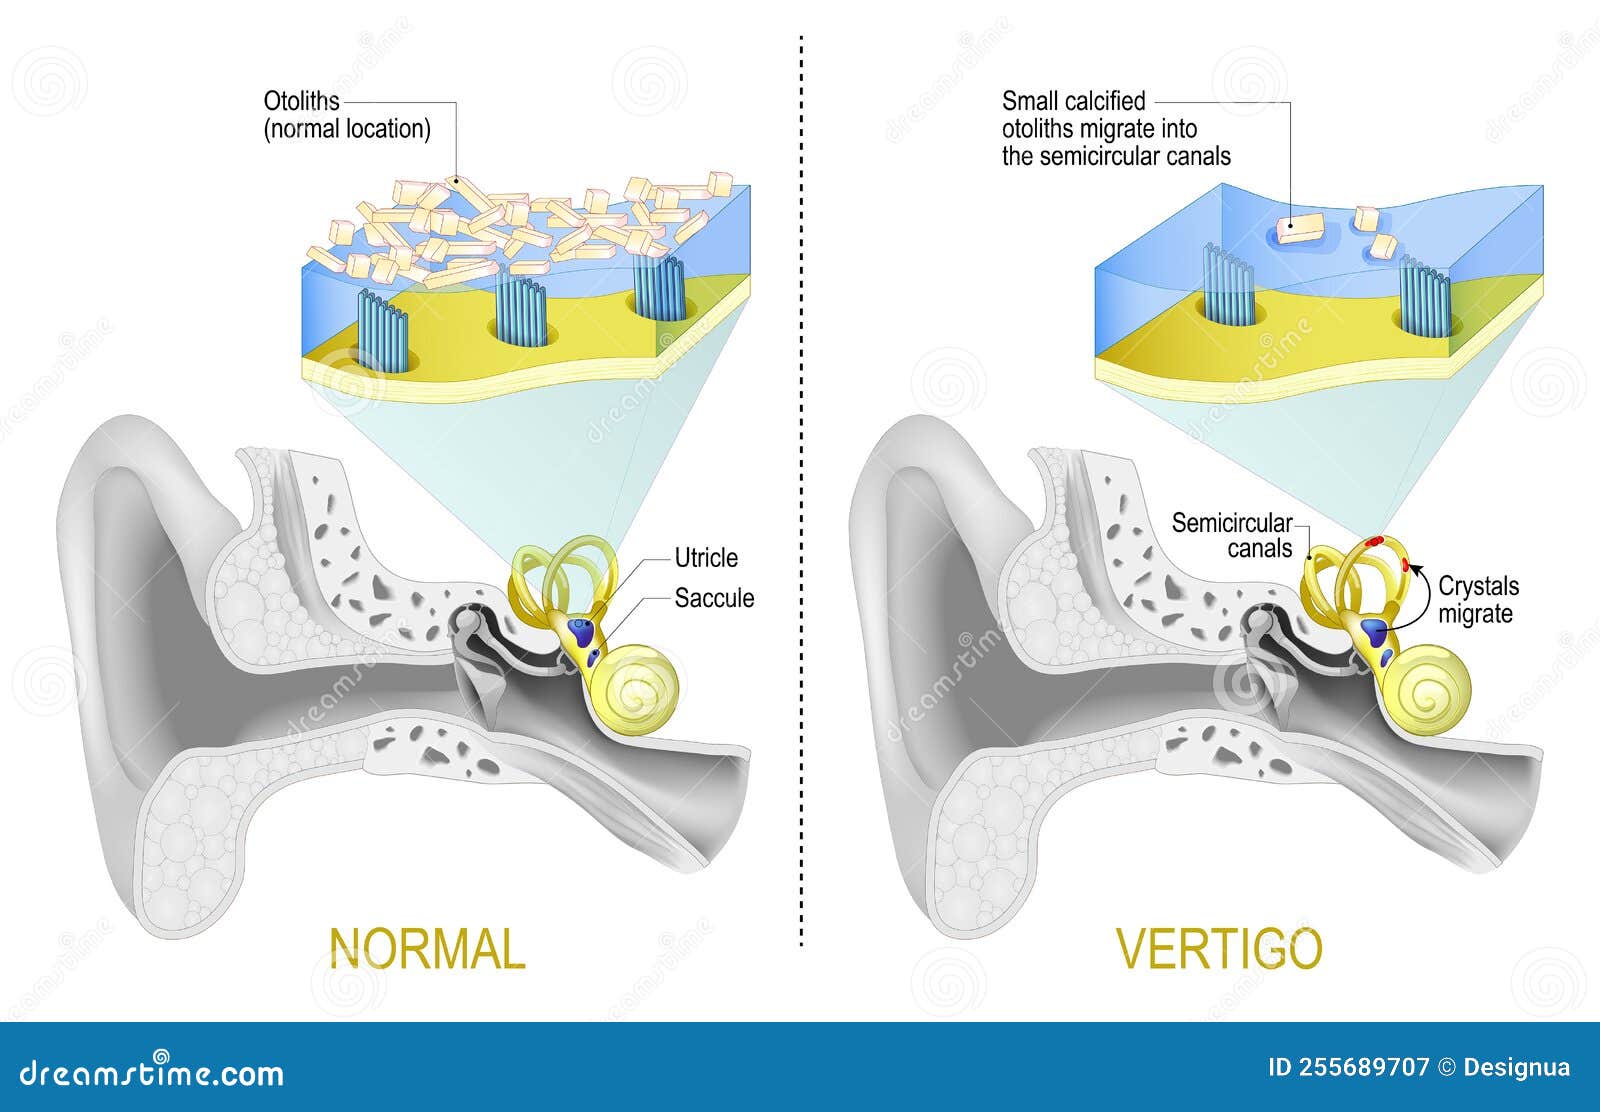 normal vestibular system and vertigo when small calcified otoliths migrate from saccule and utricle into the semicircular canals